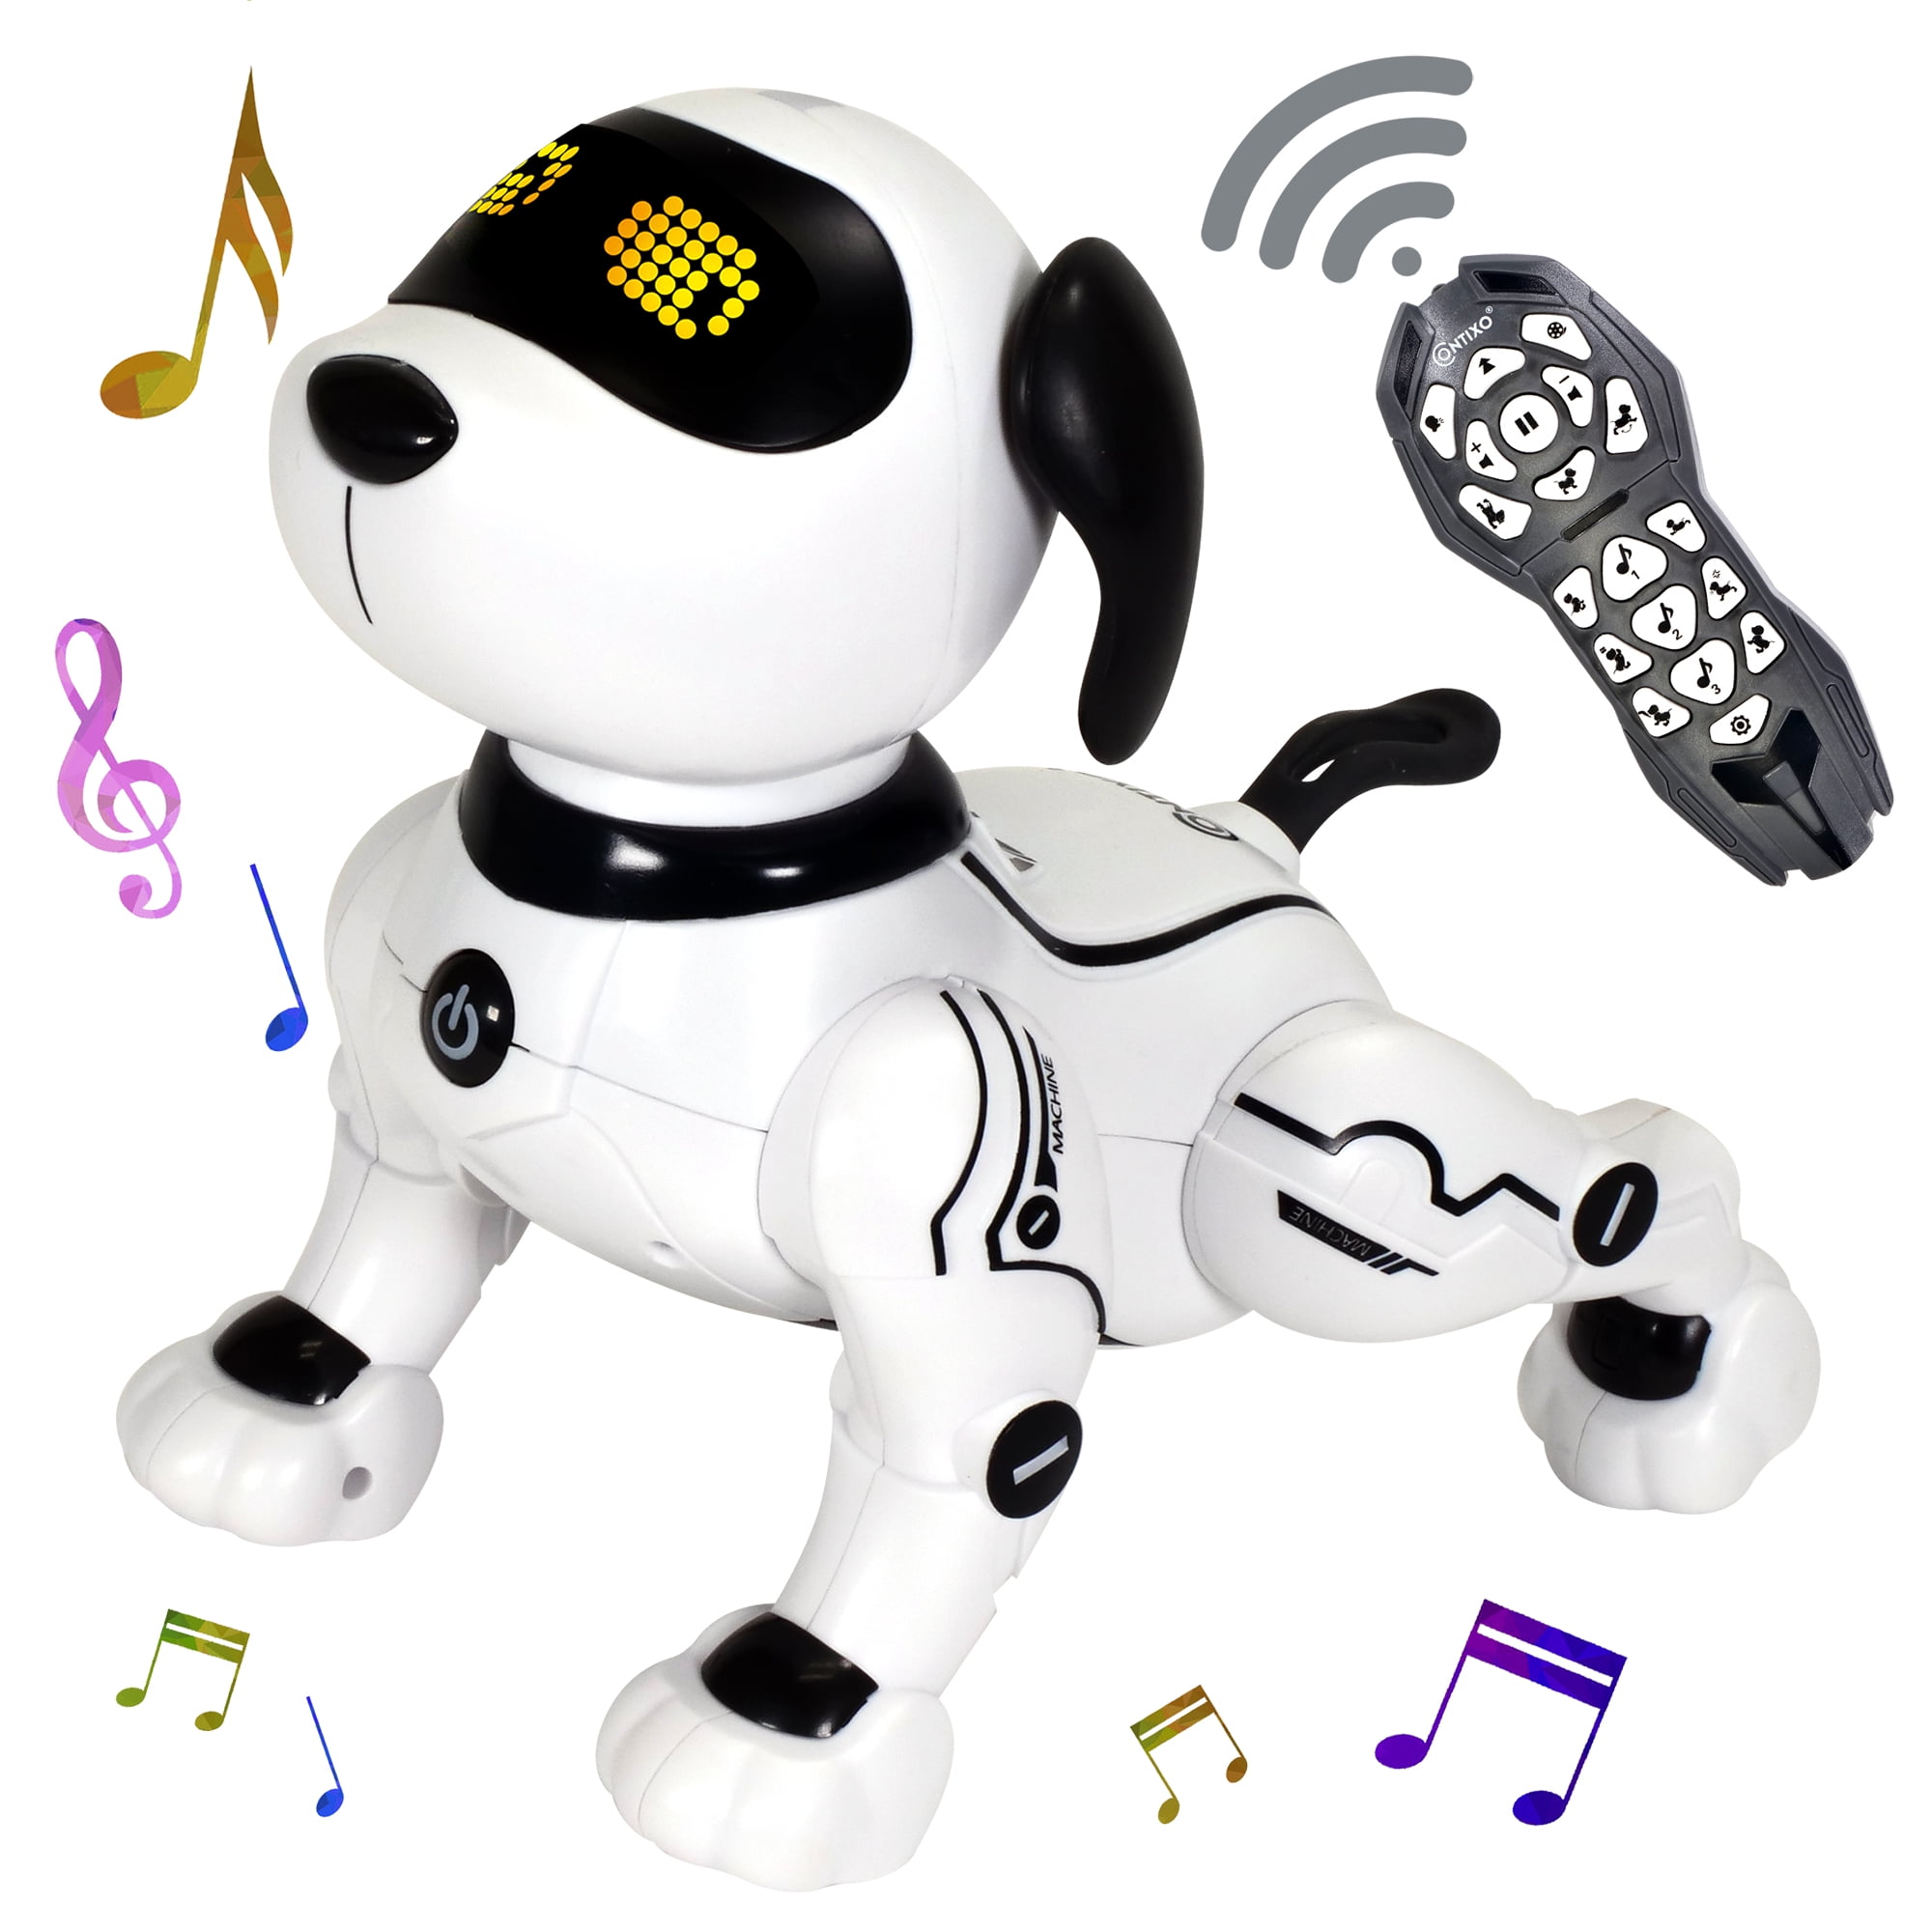 Intelligent Touch Electric Light Robot Pet Dog Gift Children Remote Control Toy 